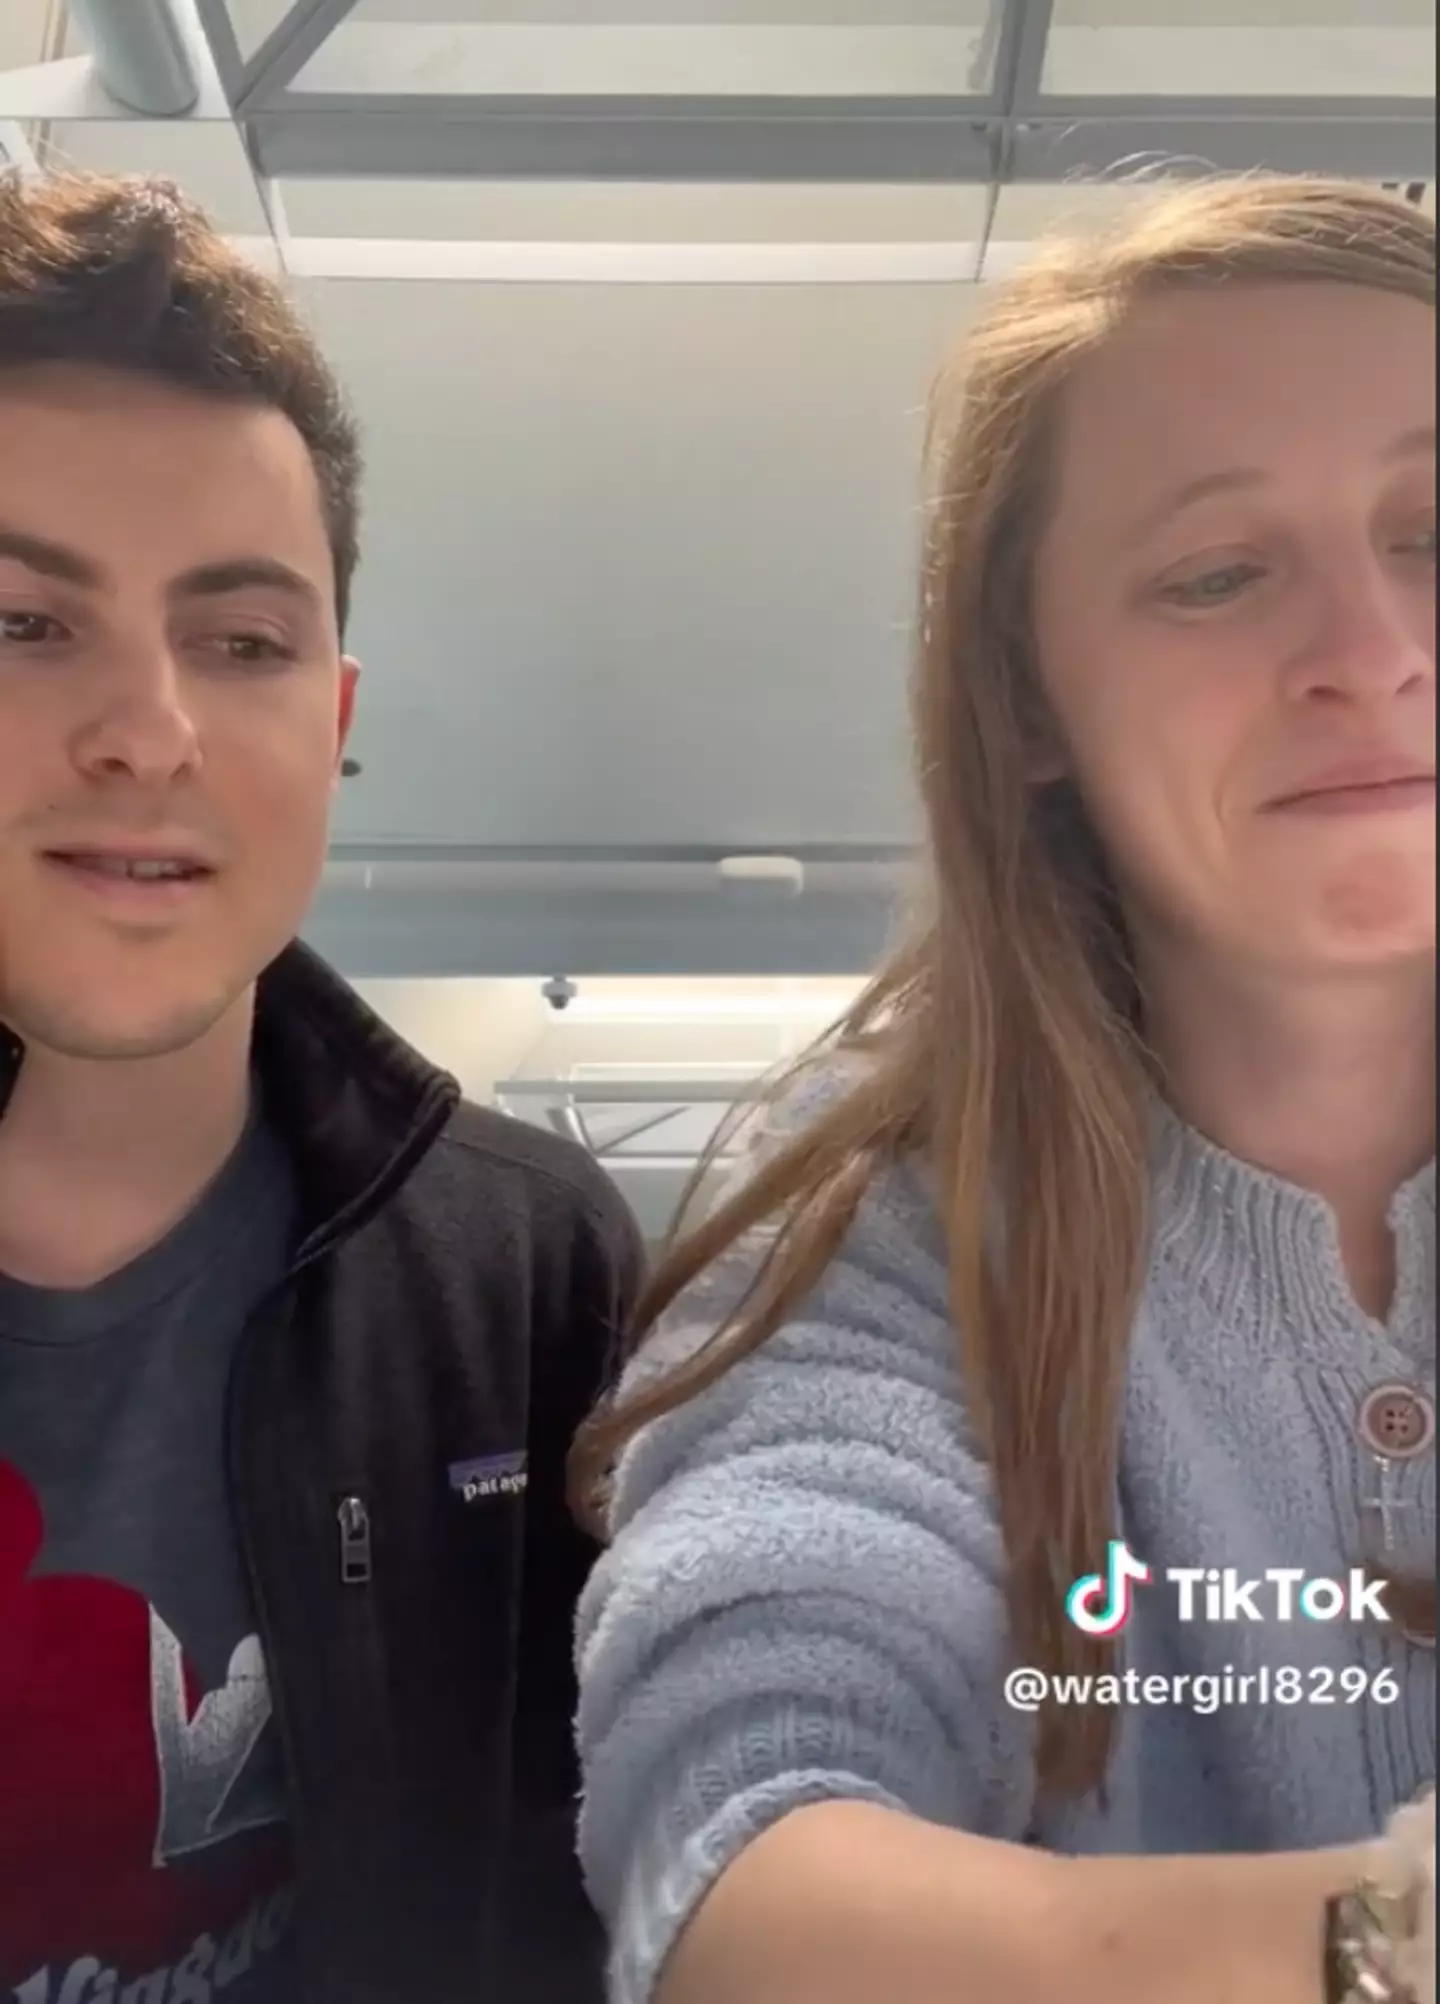 Danielle and her fiancé spoke about the incident on TikTok.